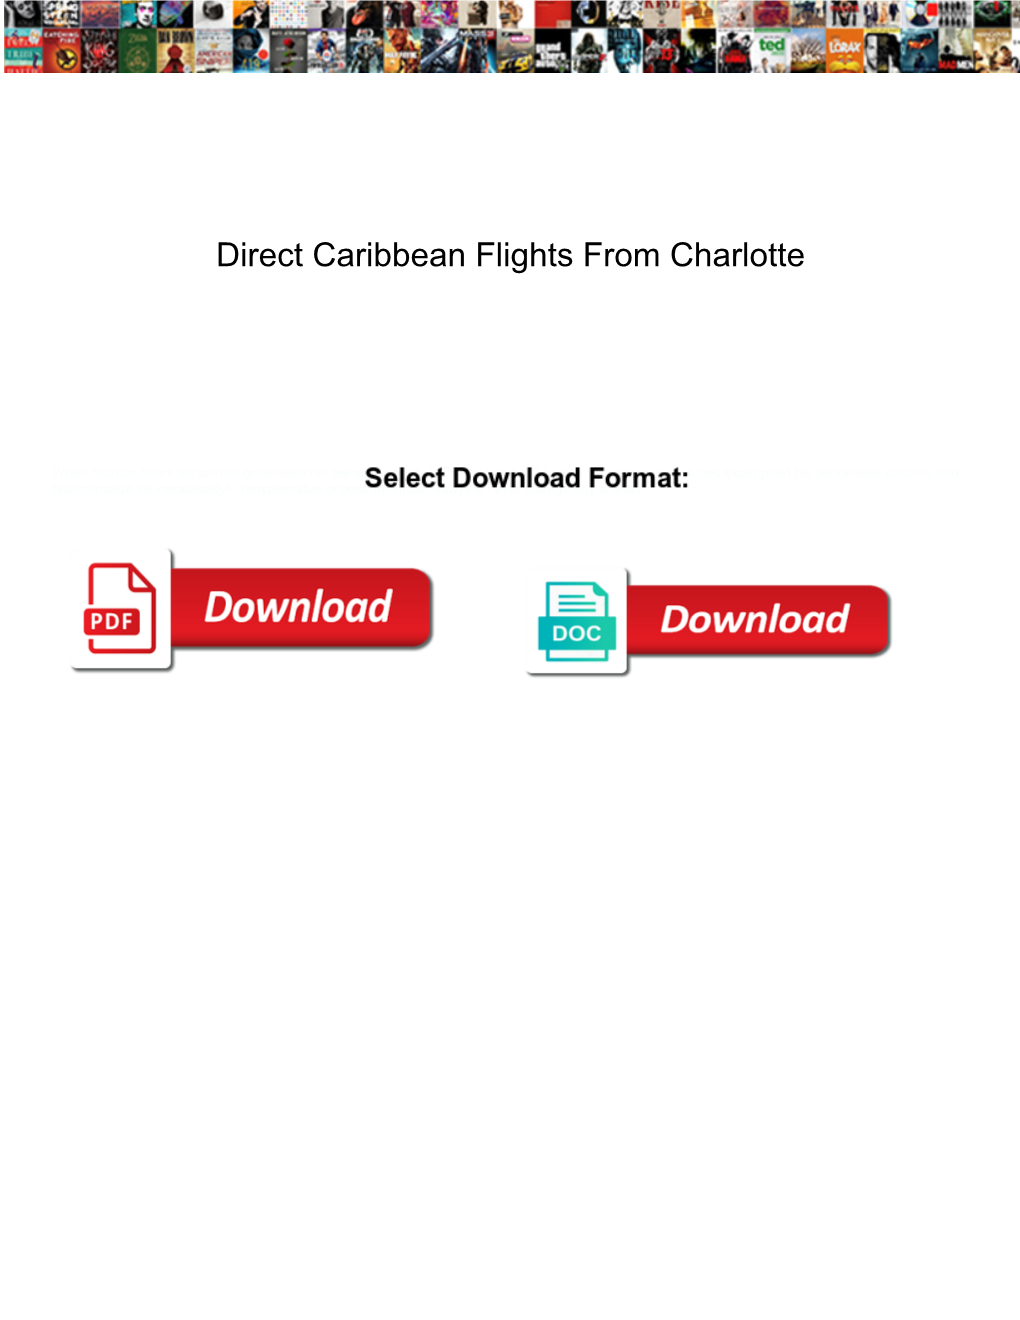 Direct Caribbean Flights from Charlotte